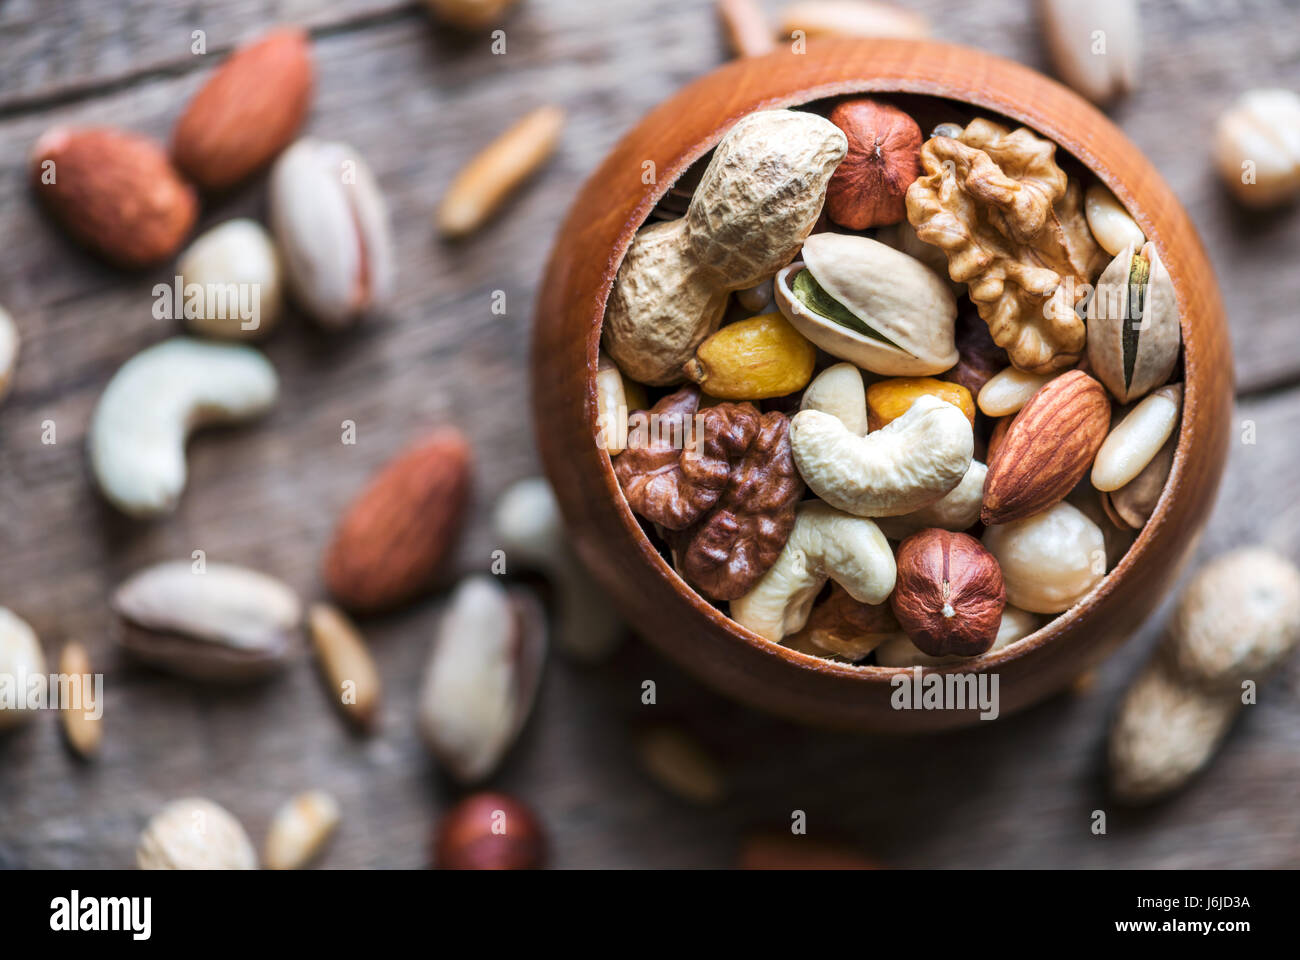 Dried mixed nuts in wooden bowl closeup. Walnut, pistachio, hazelnut, almond and other. Studio macro shoot. Stock Photo